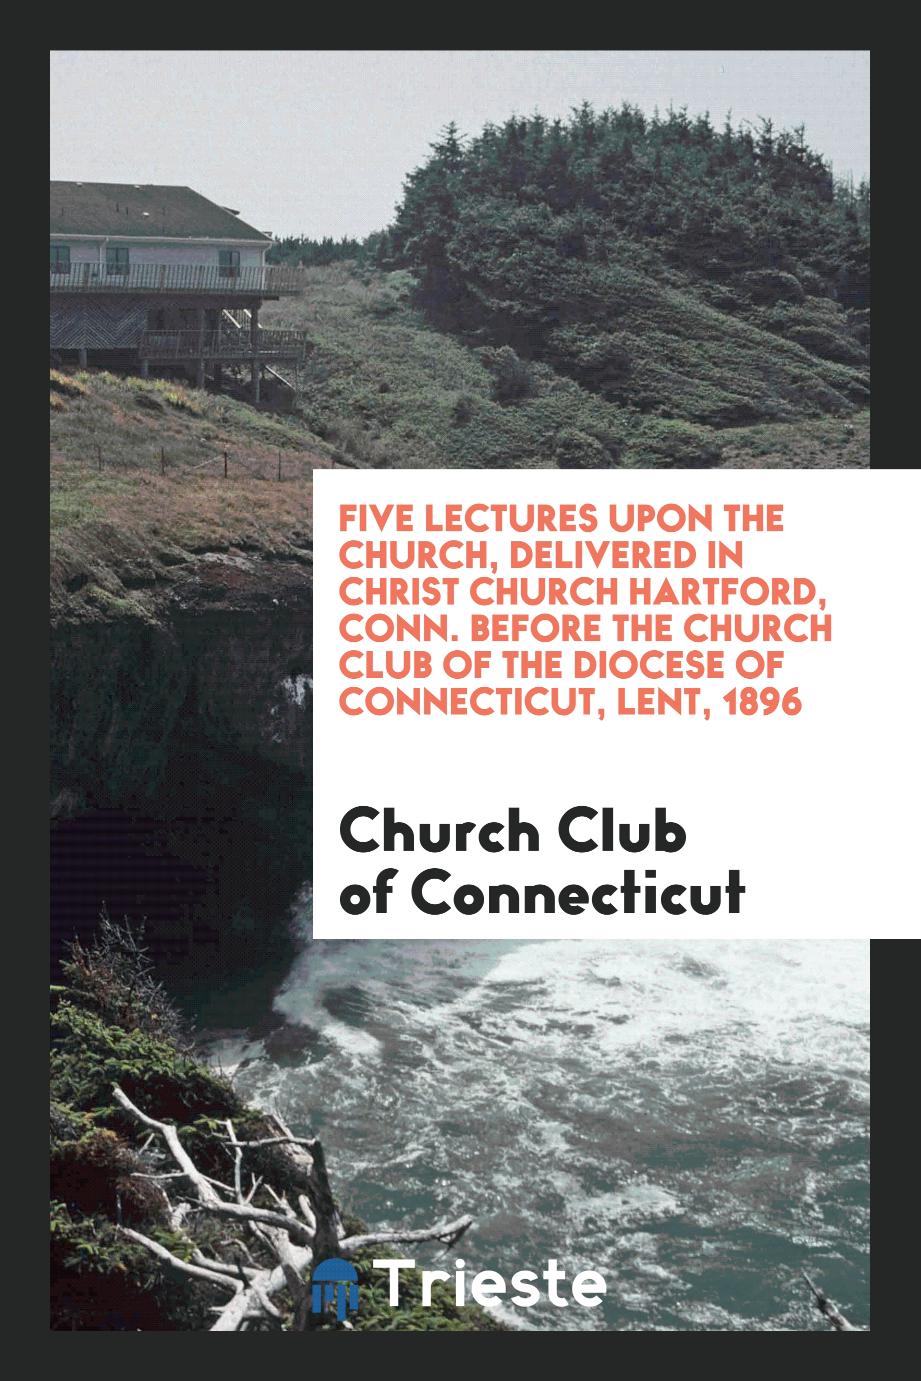 Five Lectures upon the Church, Delivered in Christ Church Hartford, Conn. Before the Church Club of the Diocese of Connecticut, Lent, 1896